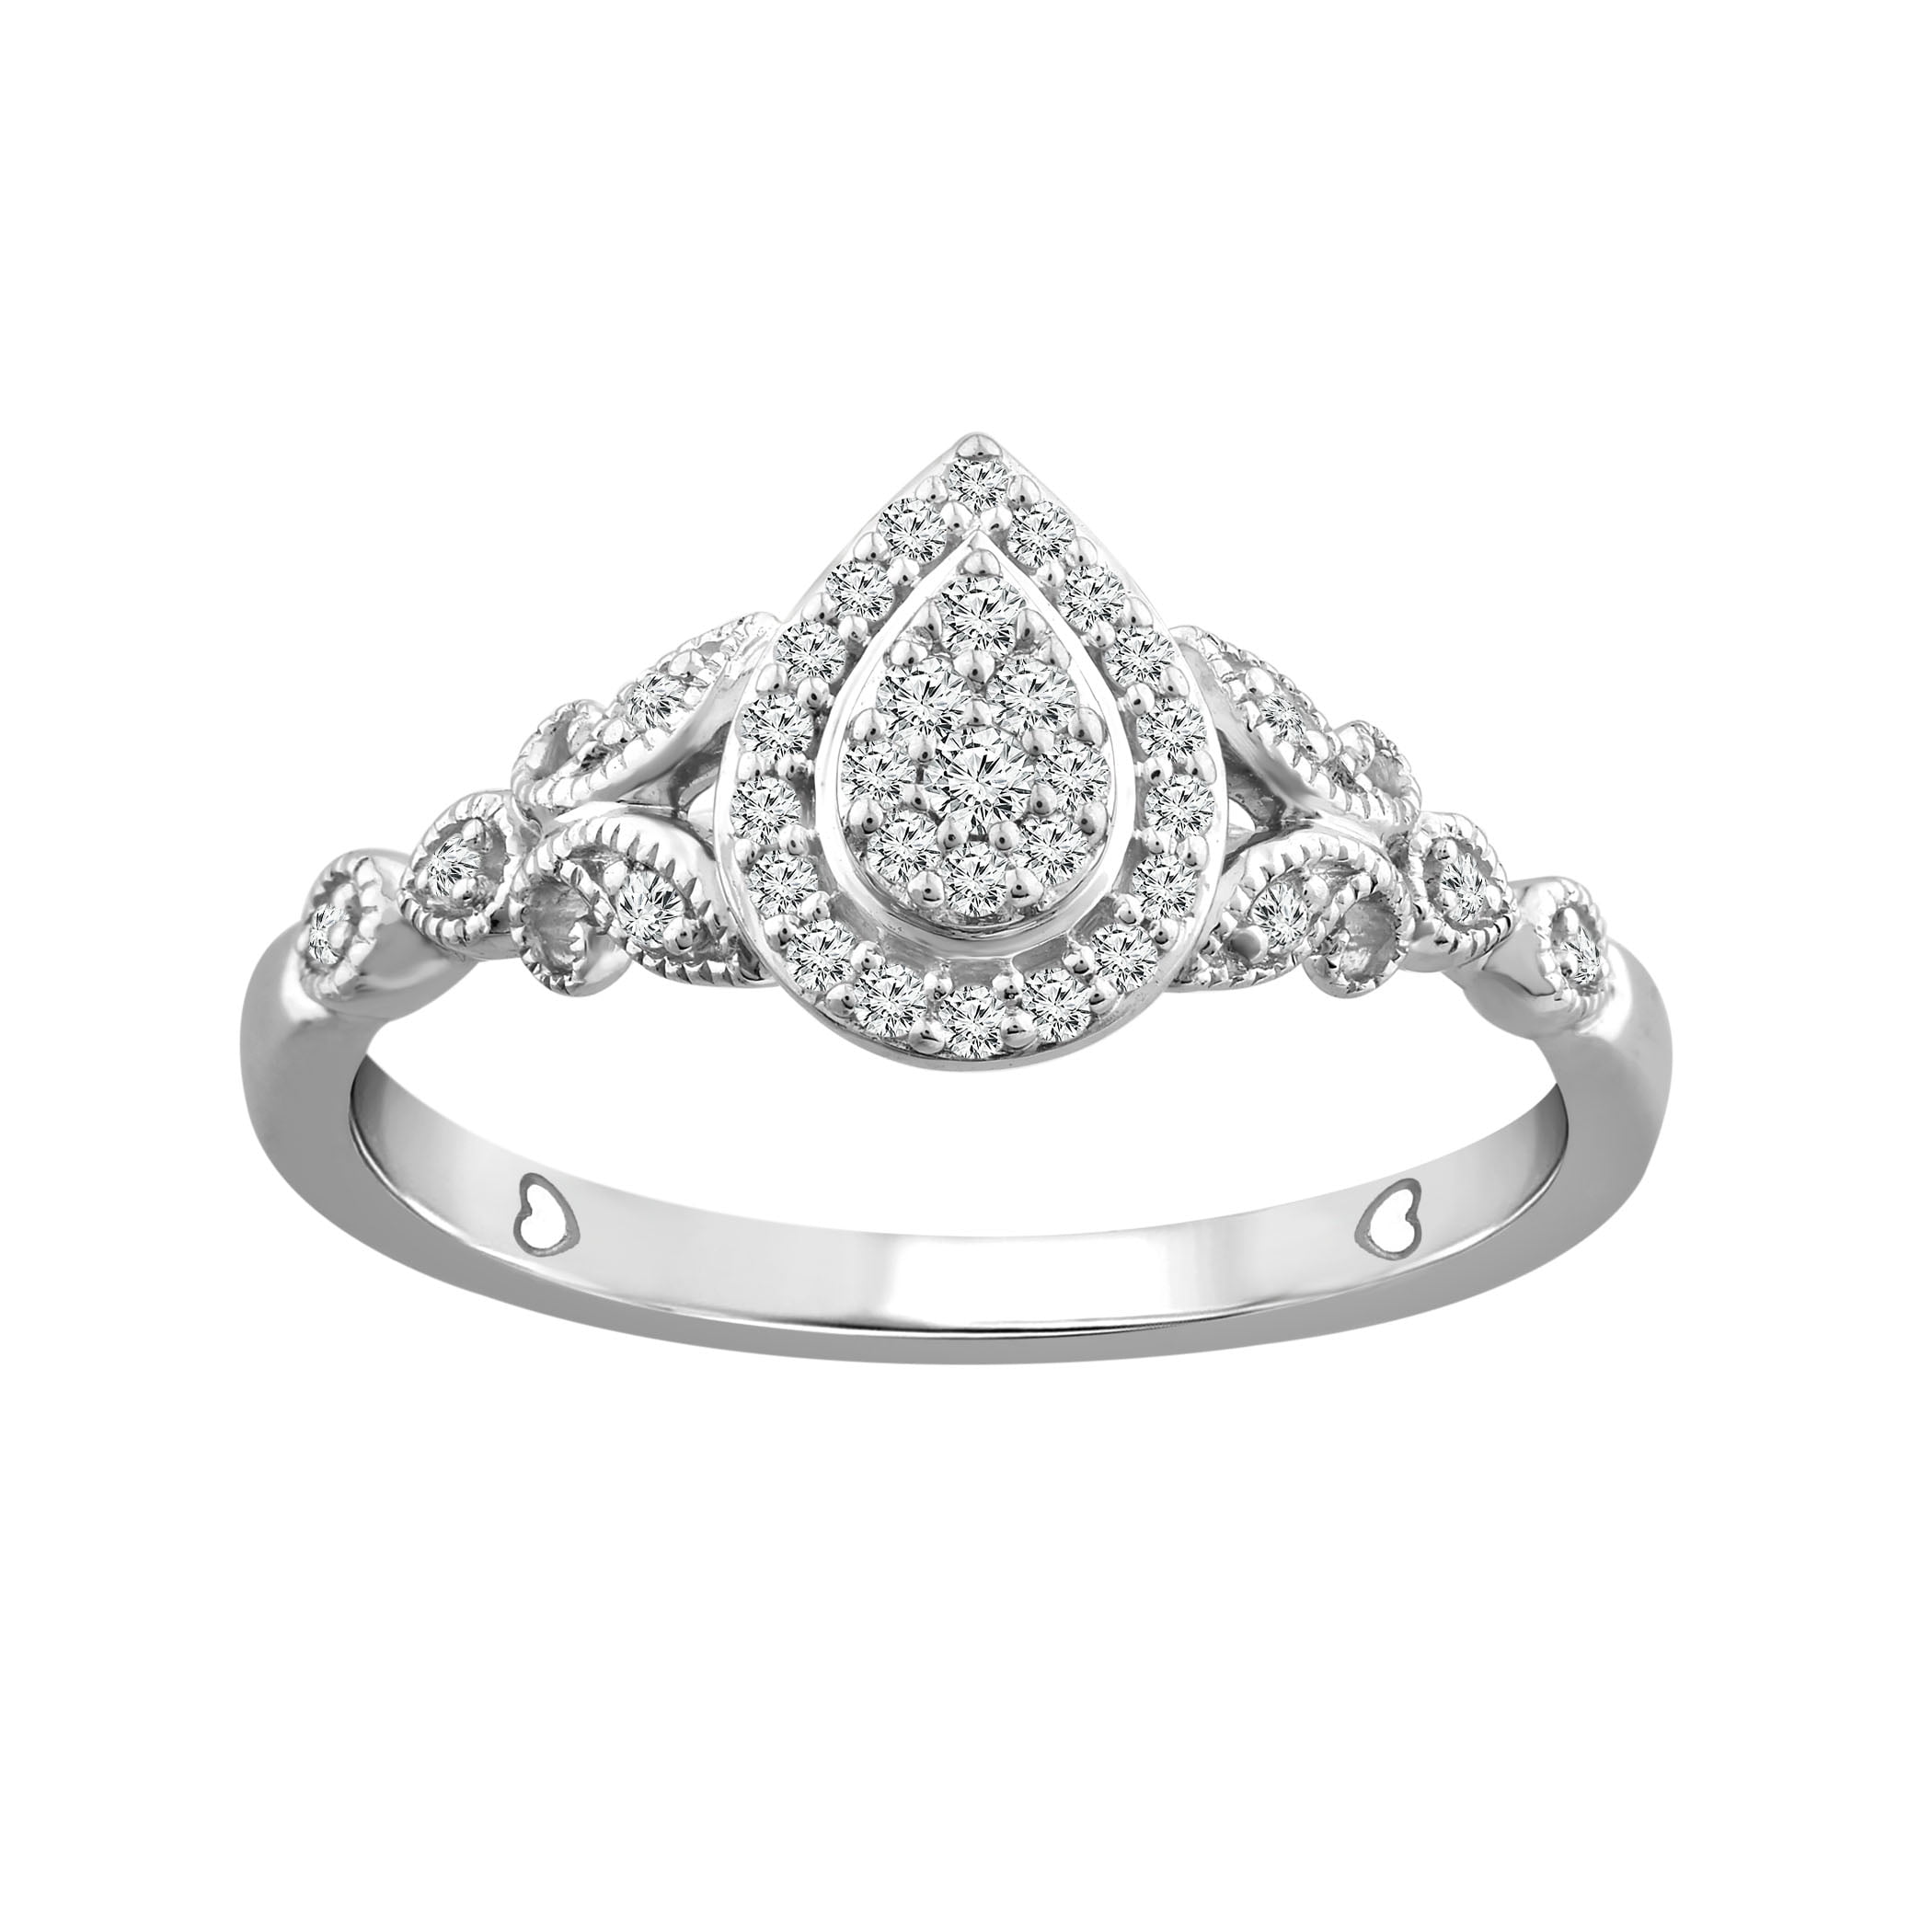 1/5cttw, I-J Color, I3 Clarity Champagne and White Diamond Ring Size 7